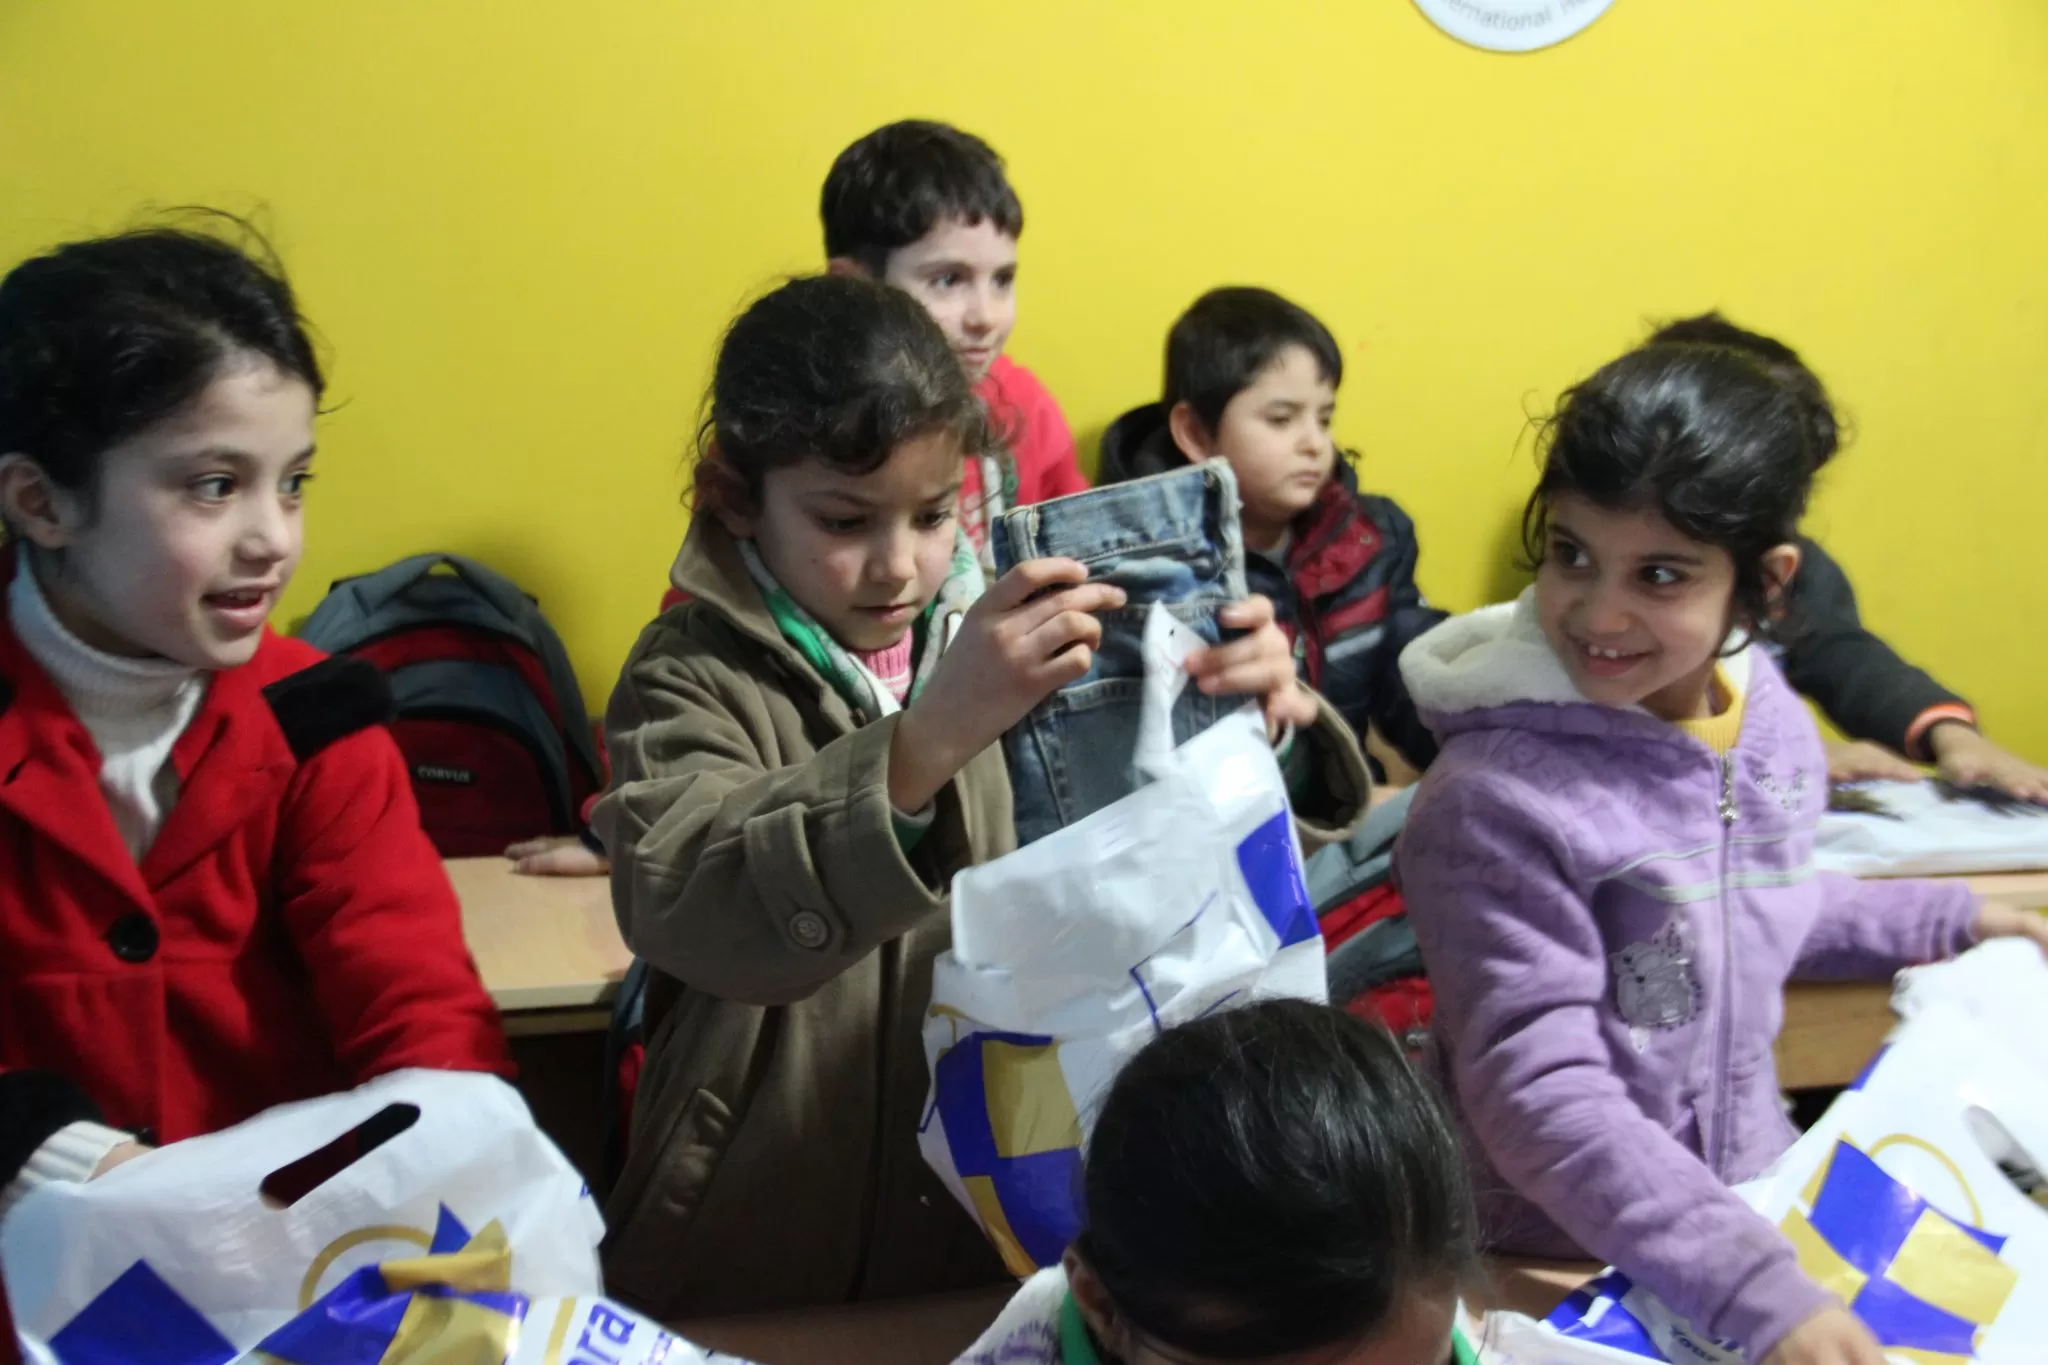 Our Christmas campaign brings presents to 510 refugee children in Lebanon